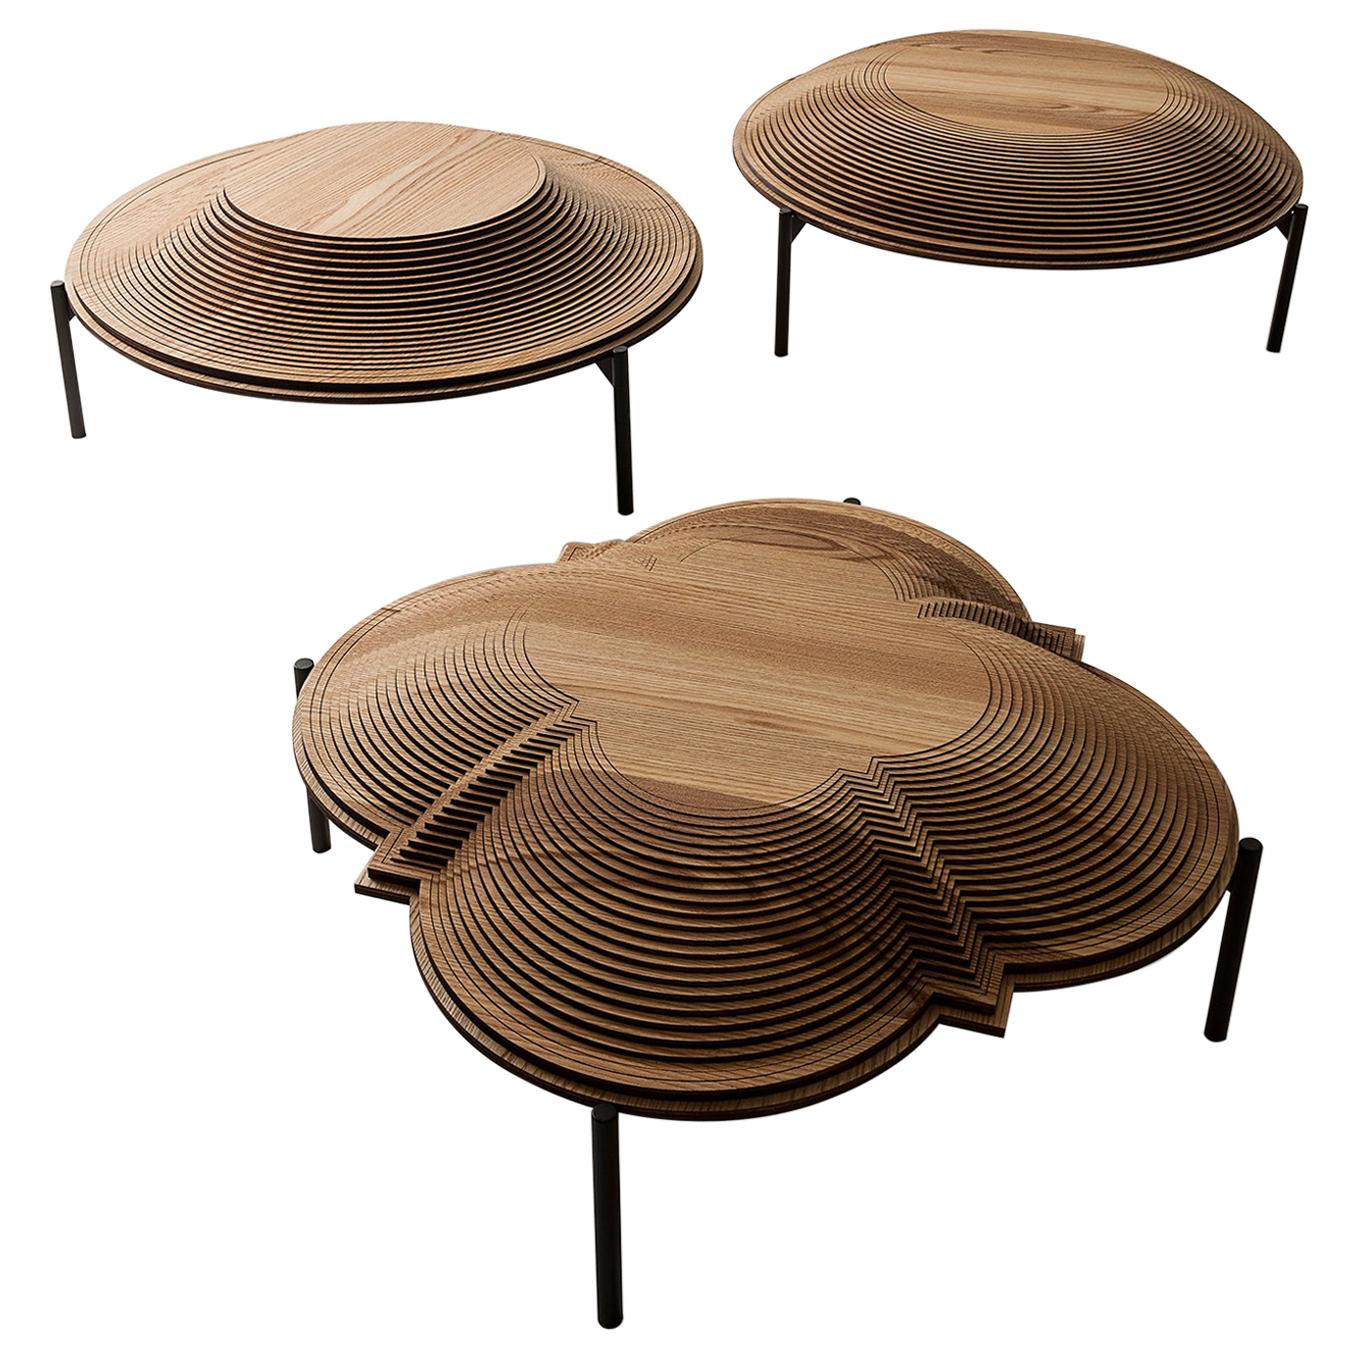 Modern Sculptural Wood Coffee Table "Dome 1" by Sebastiano Bottos, Italy